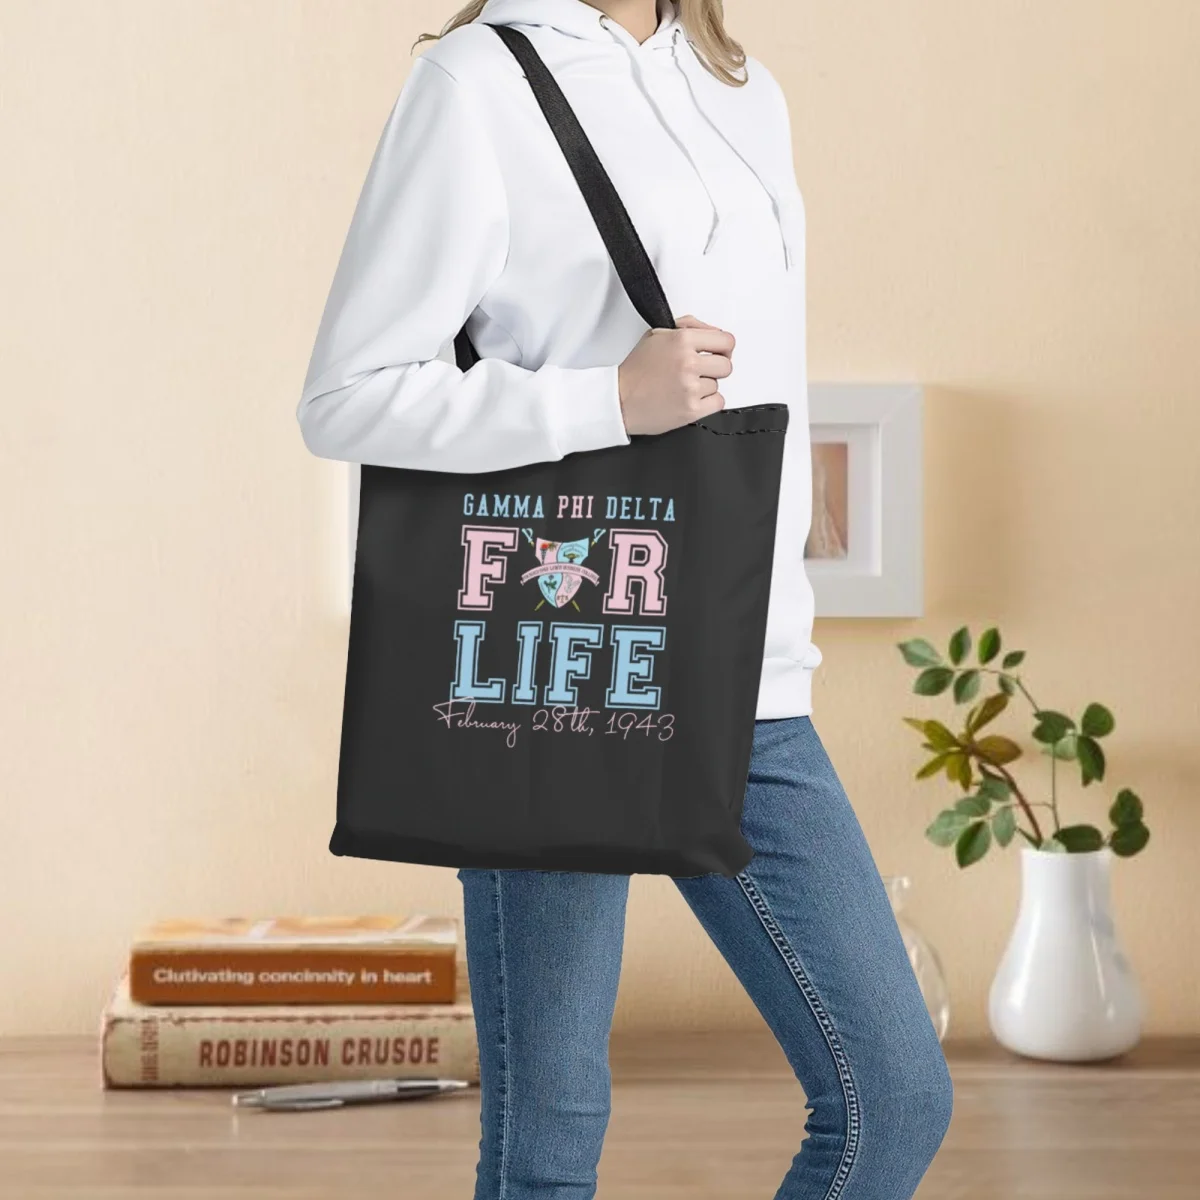 

Canvas Tote Bag for Women Shoulder Gamma Phi Delta Greek Life Sorority Gift Double Sided Print Eco-friendly Grocery Handbags